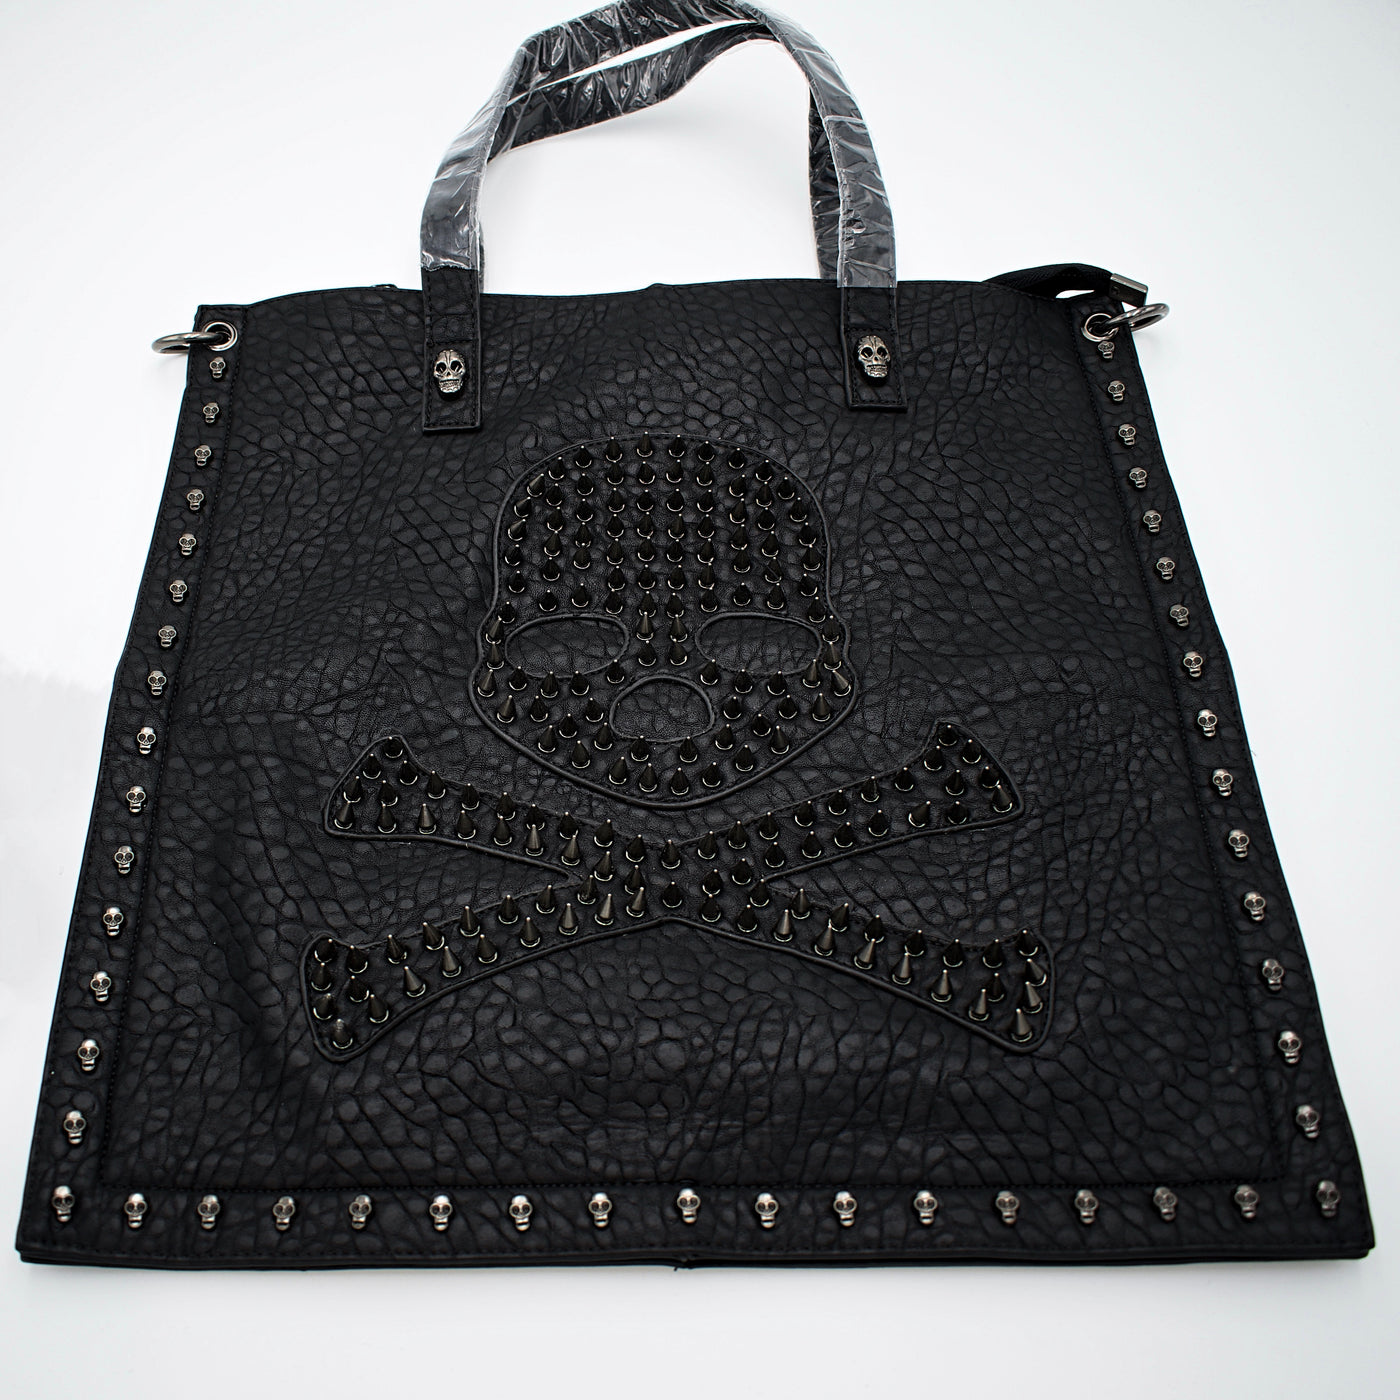 Studded Skull and Crossbones Tote Bag - The Cranio Collections